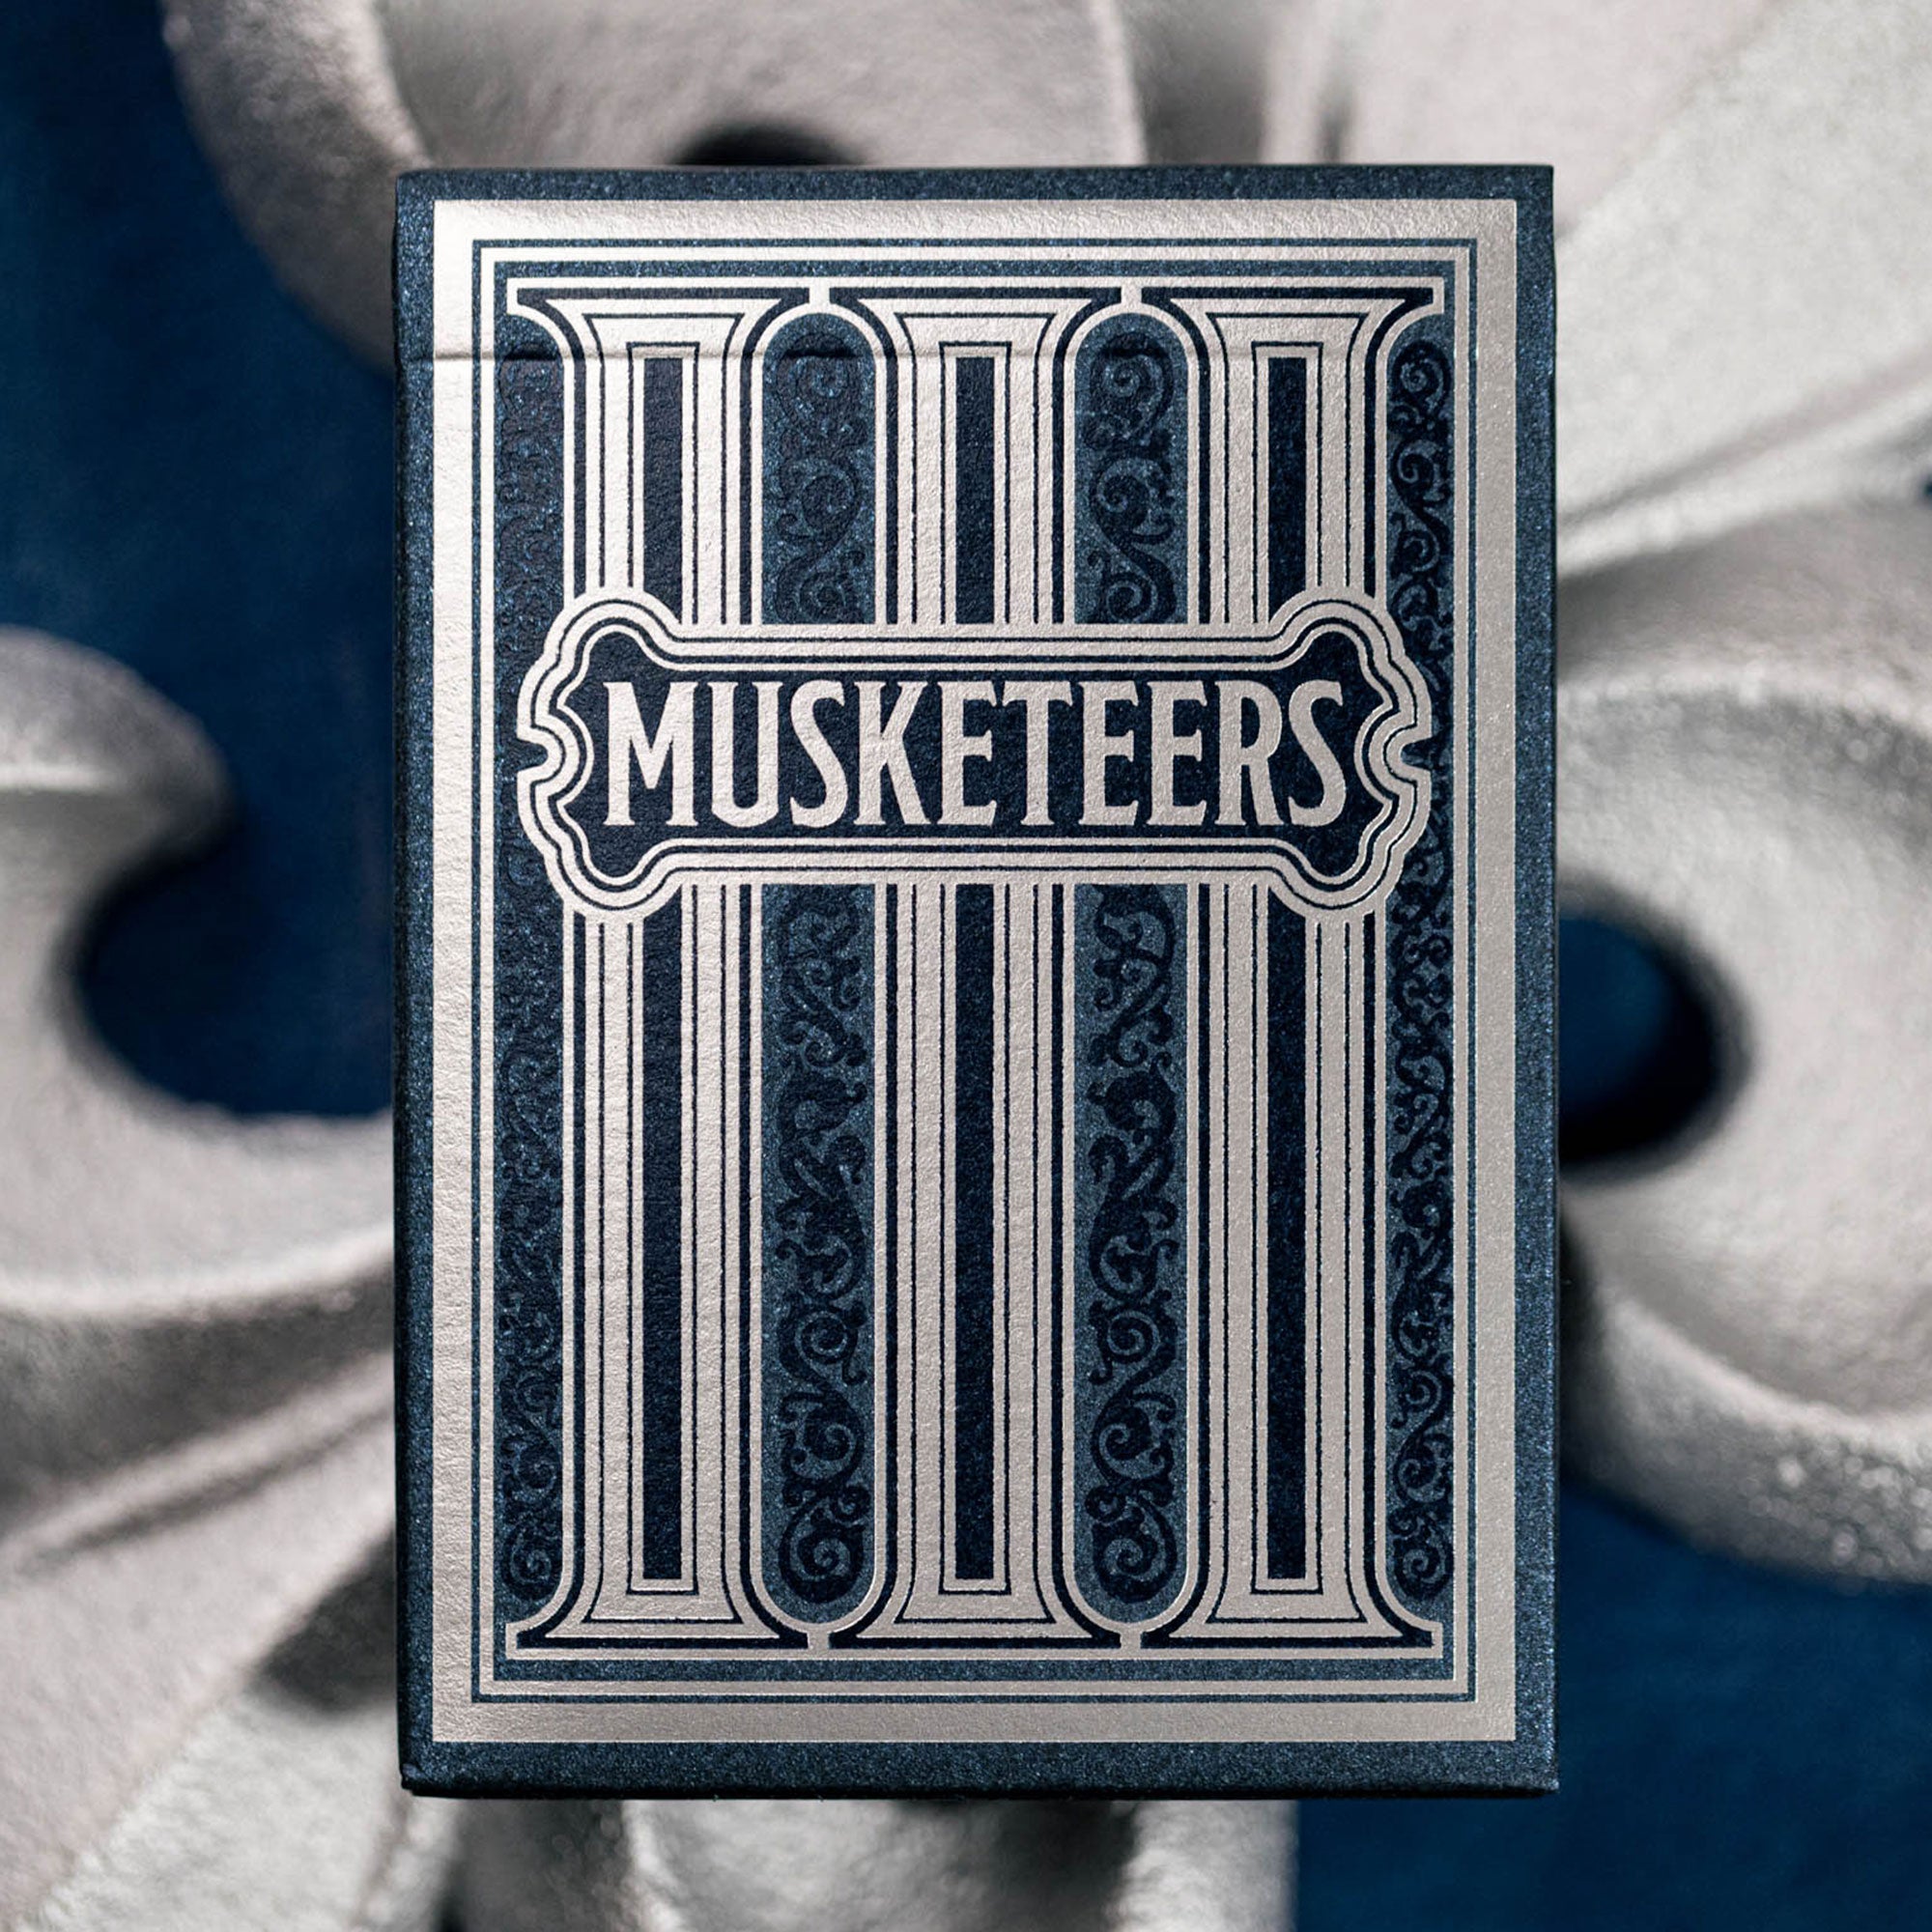 3 Musketeers Standard Edition